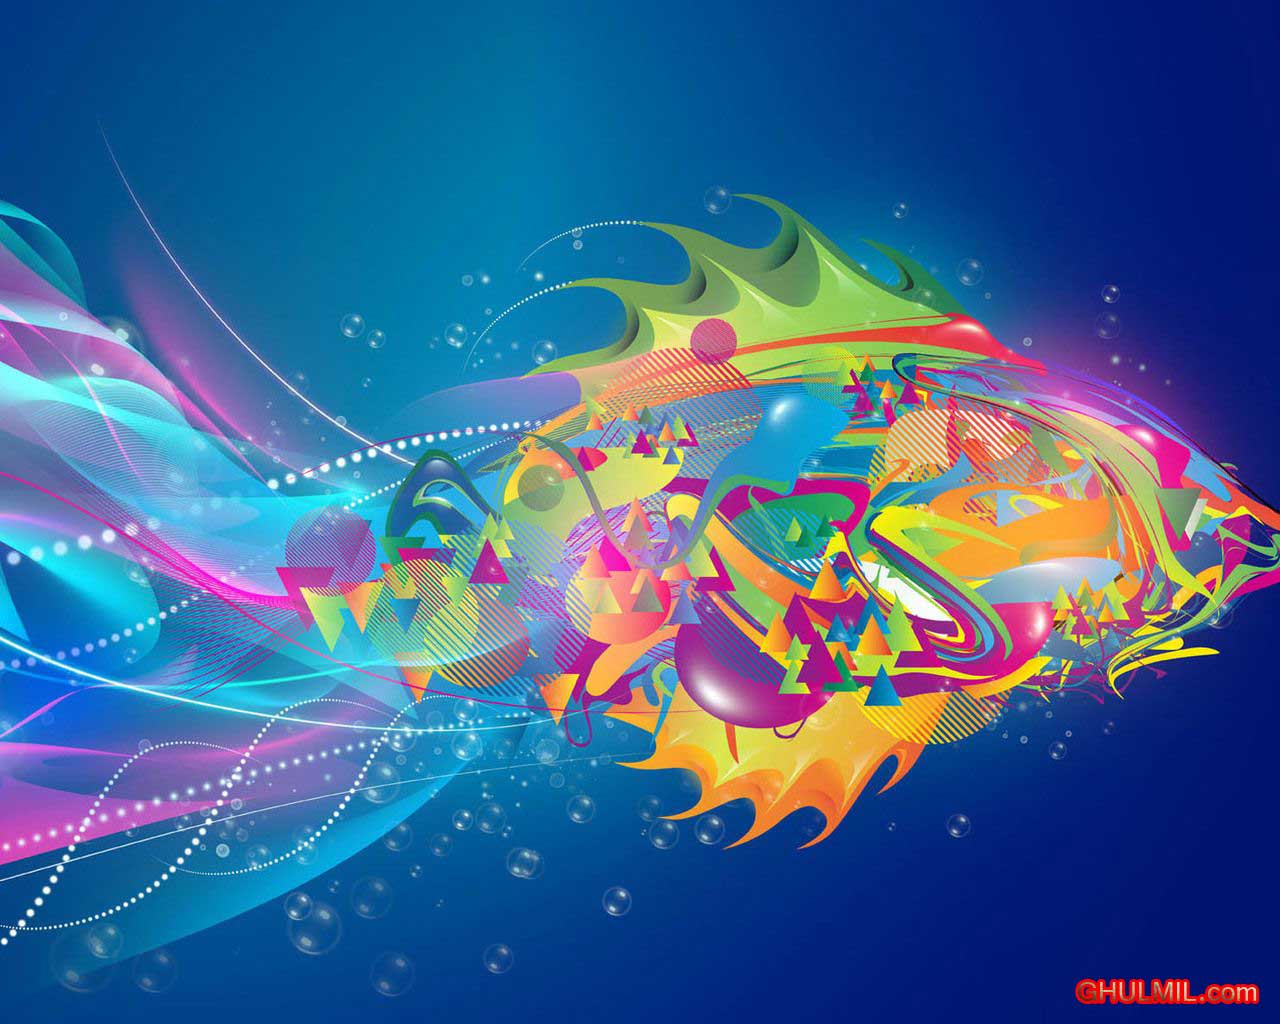 COLORFUL wallpapers